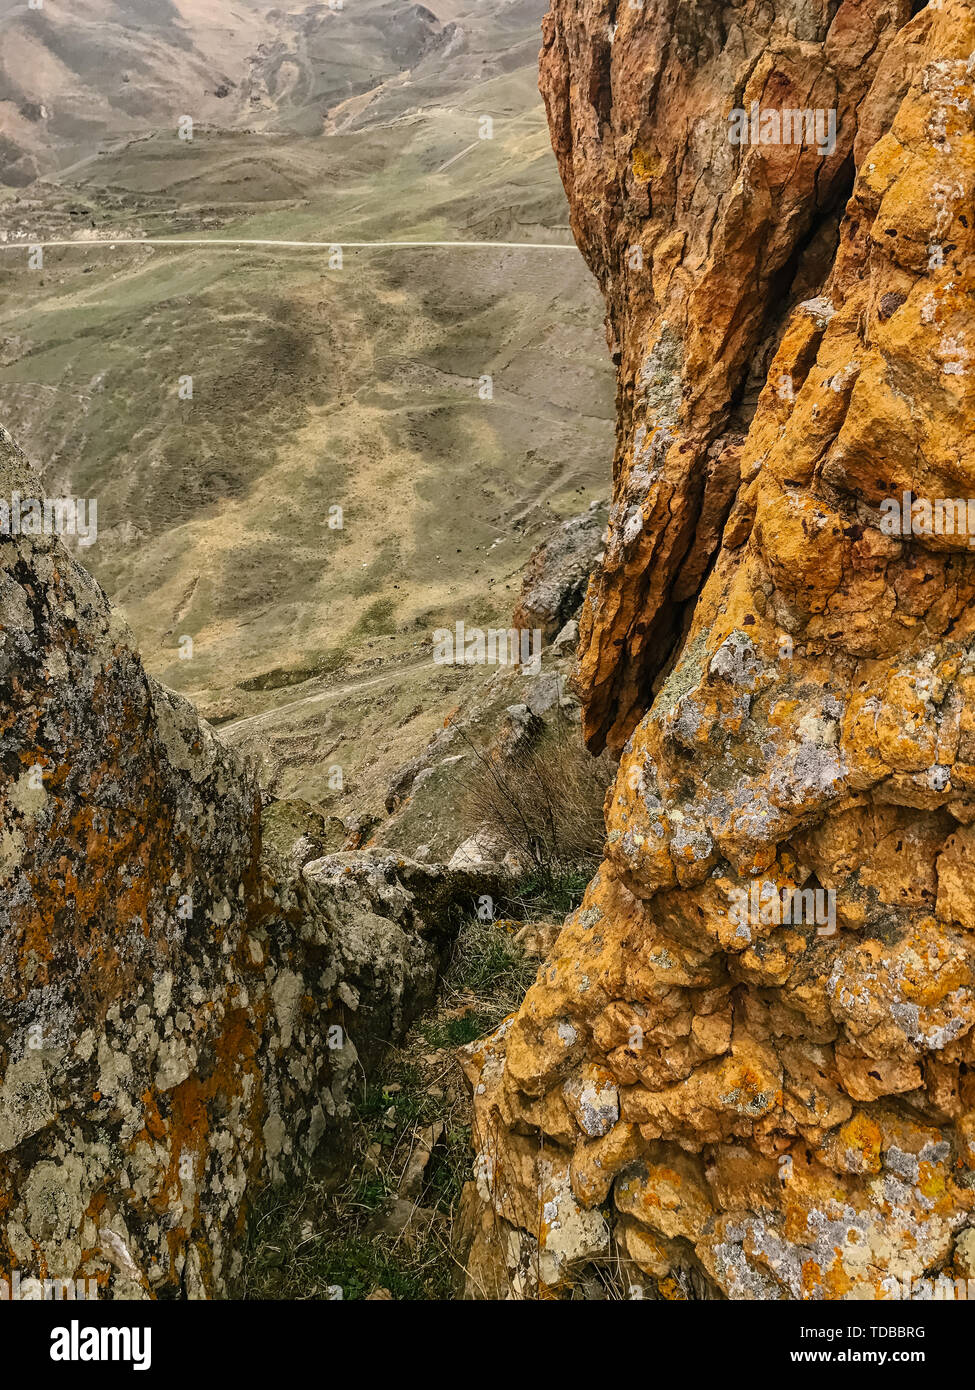 hills and stone mountains in the daytime view from above Stock Photo